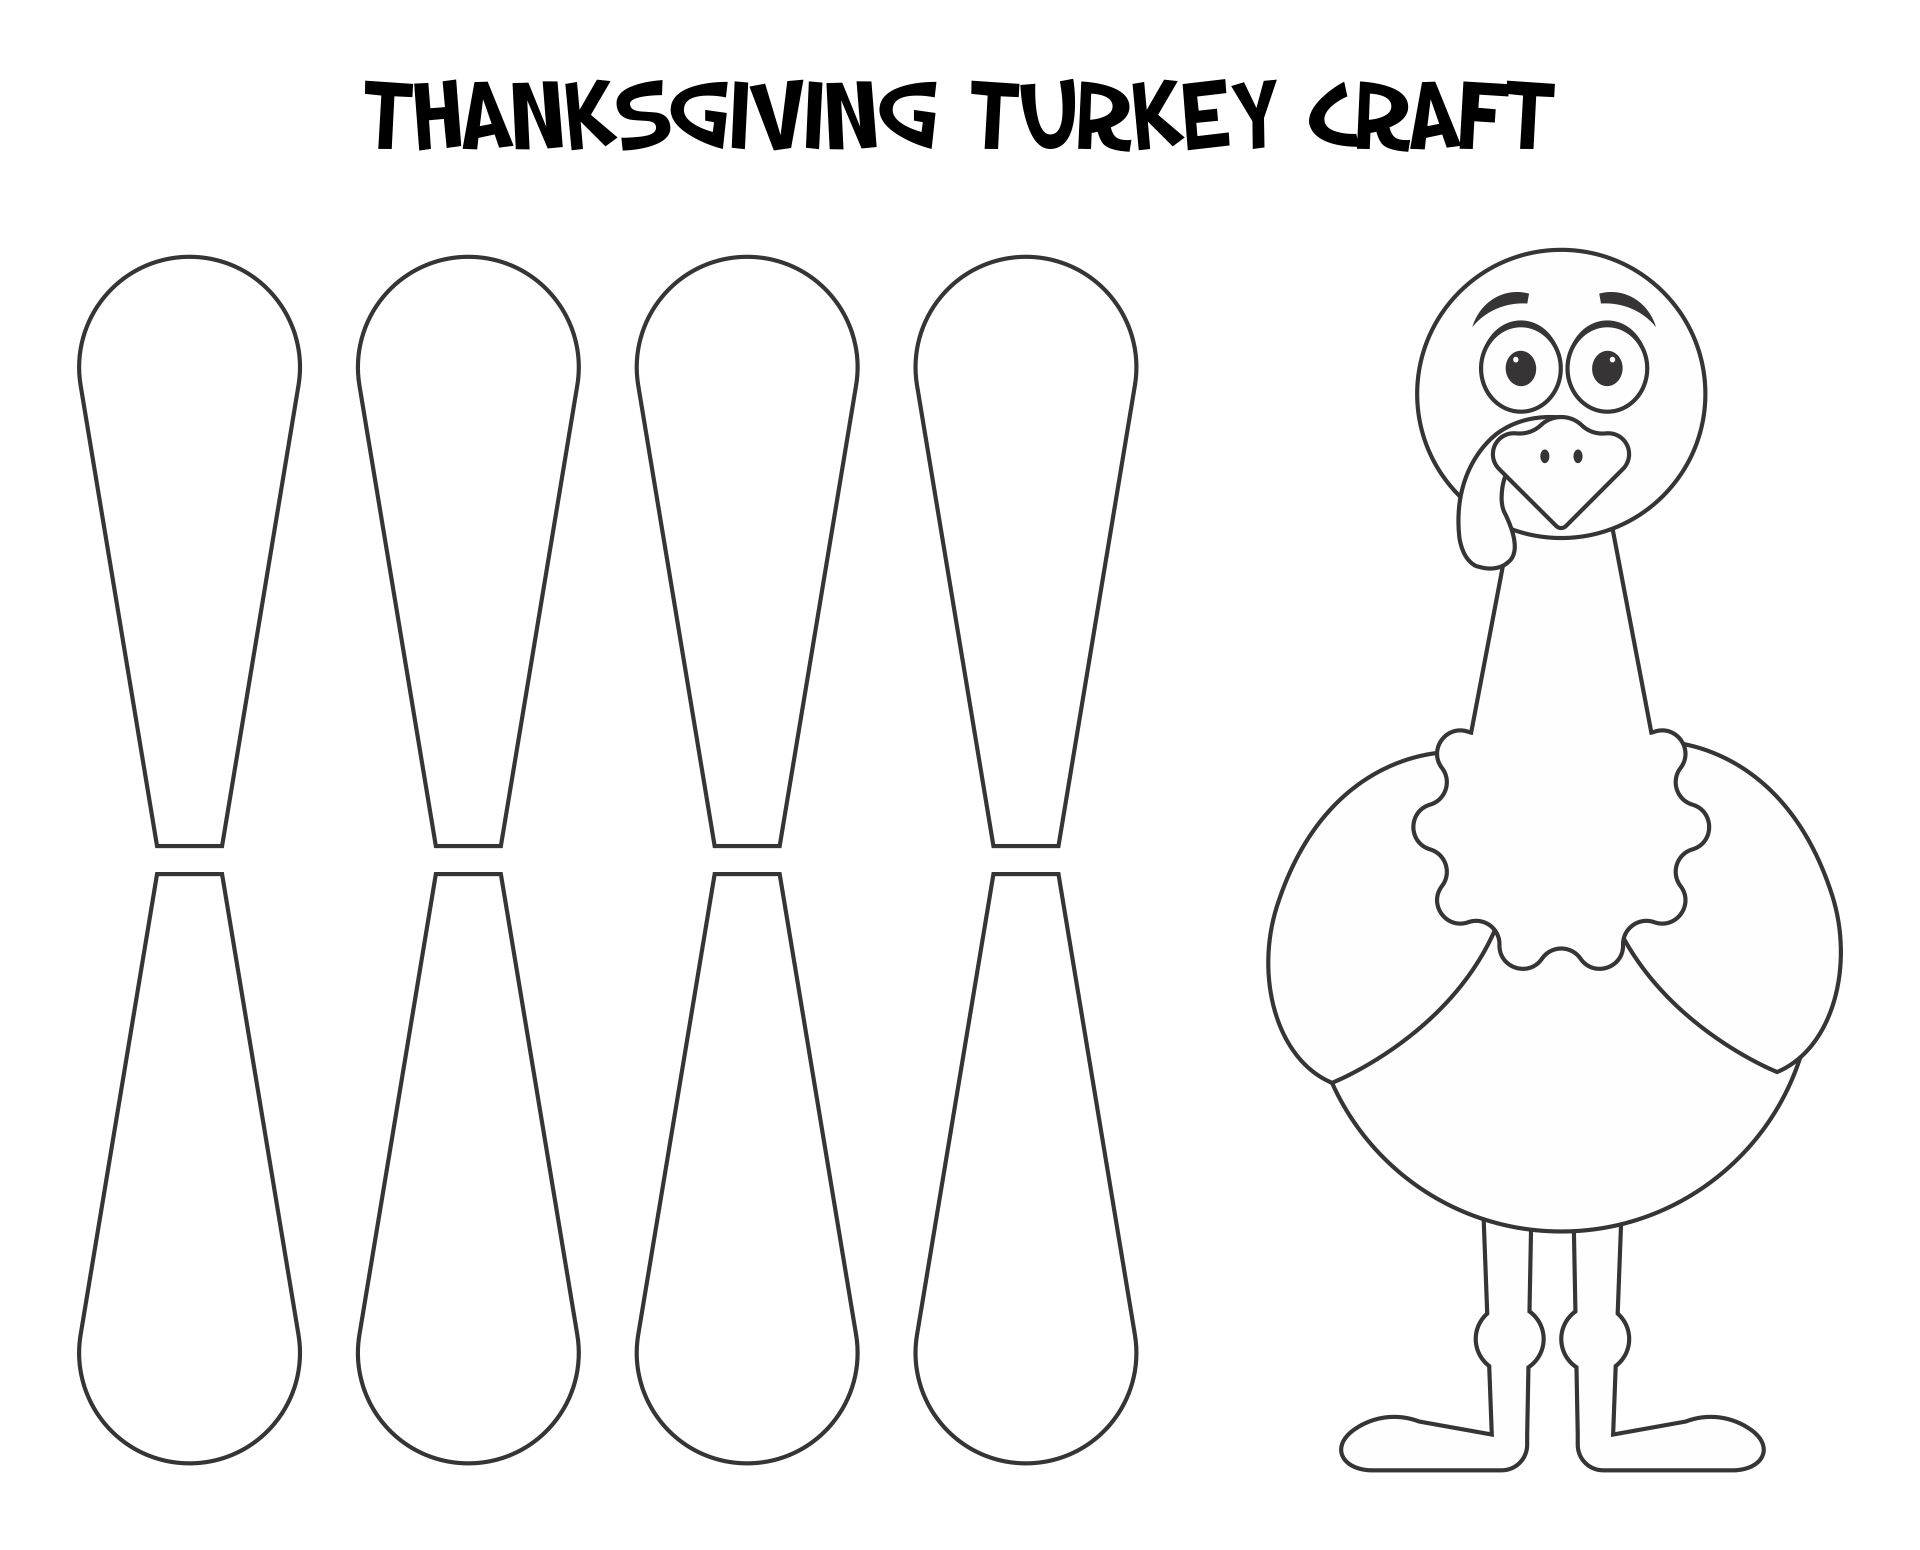 6 Best Images of Thanksgiving Printable Craft Templates - Thanksgiving ...